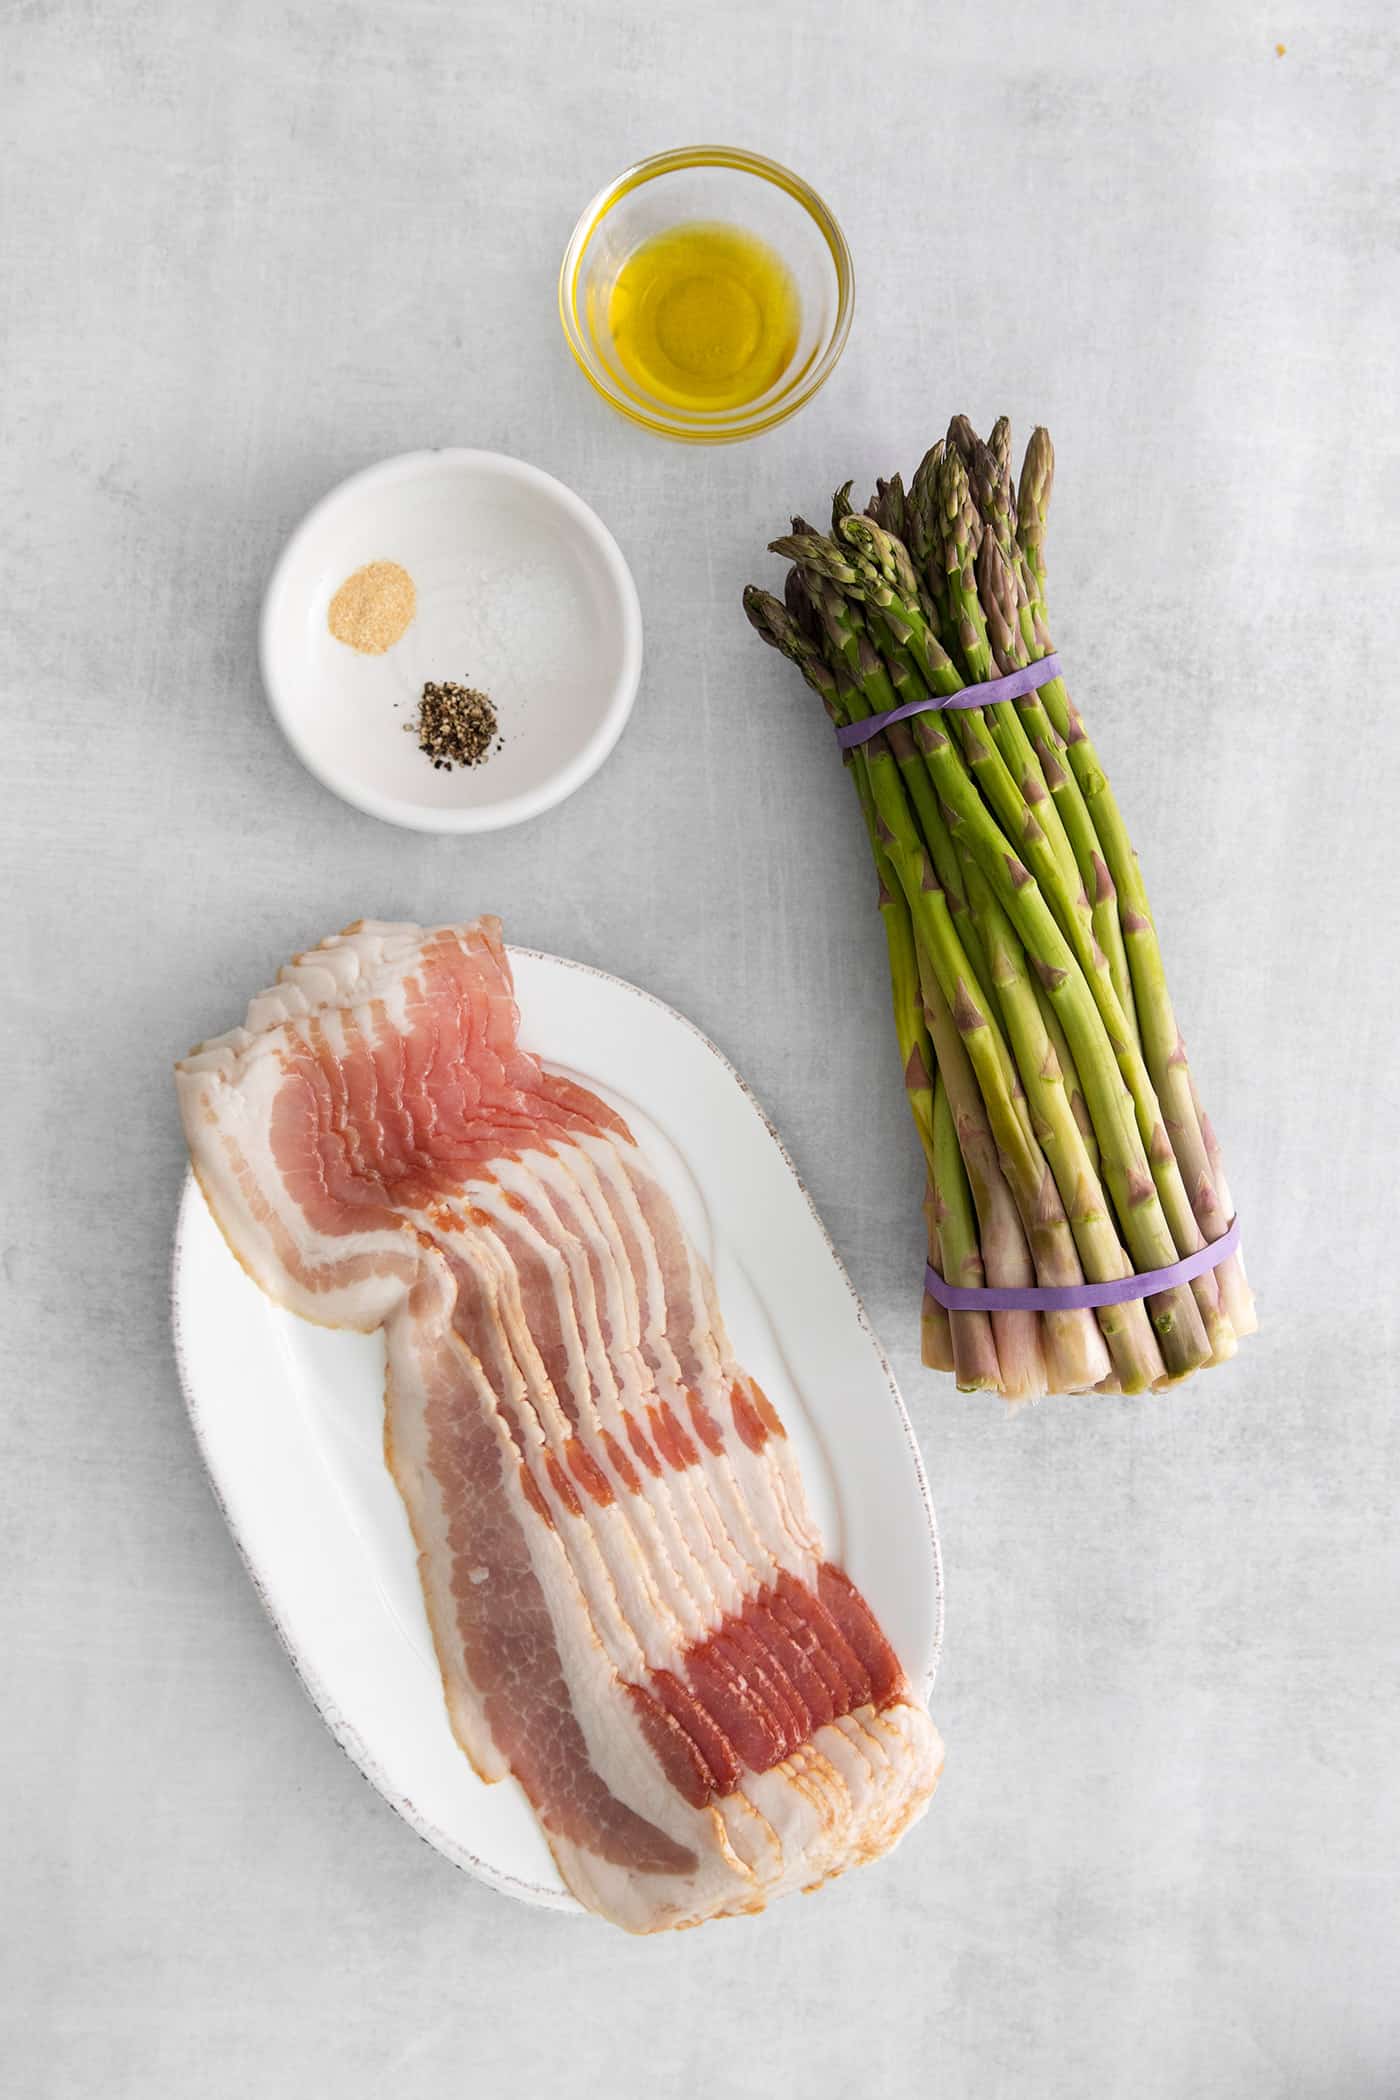 Bacon wrapped asparagus ingredients